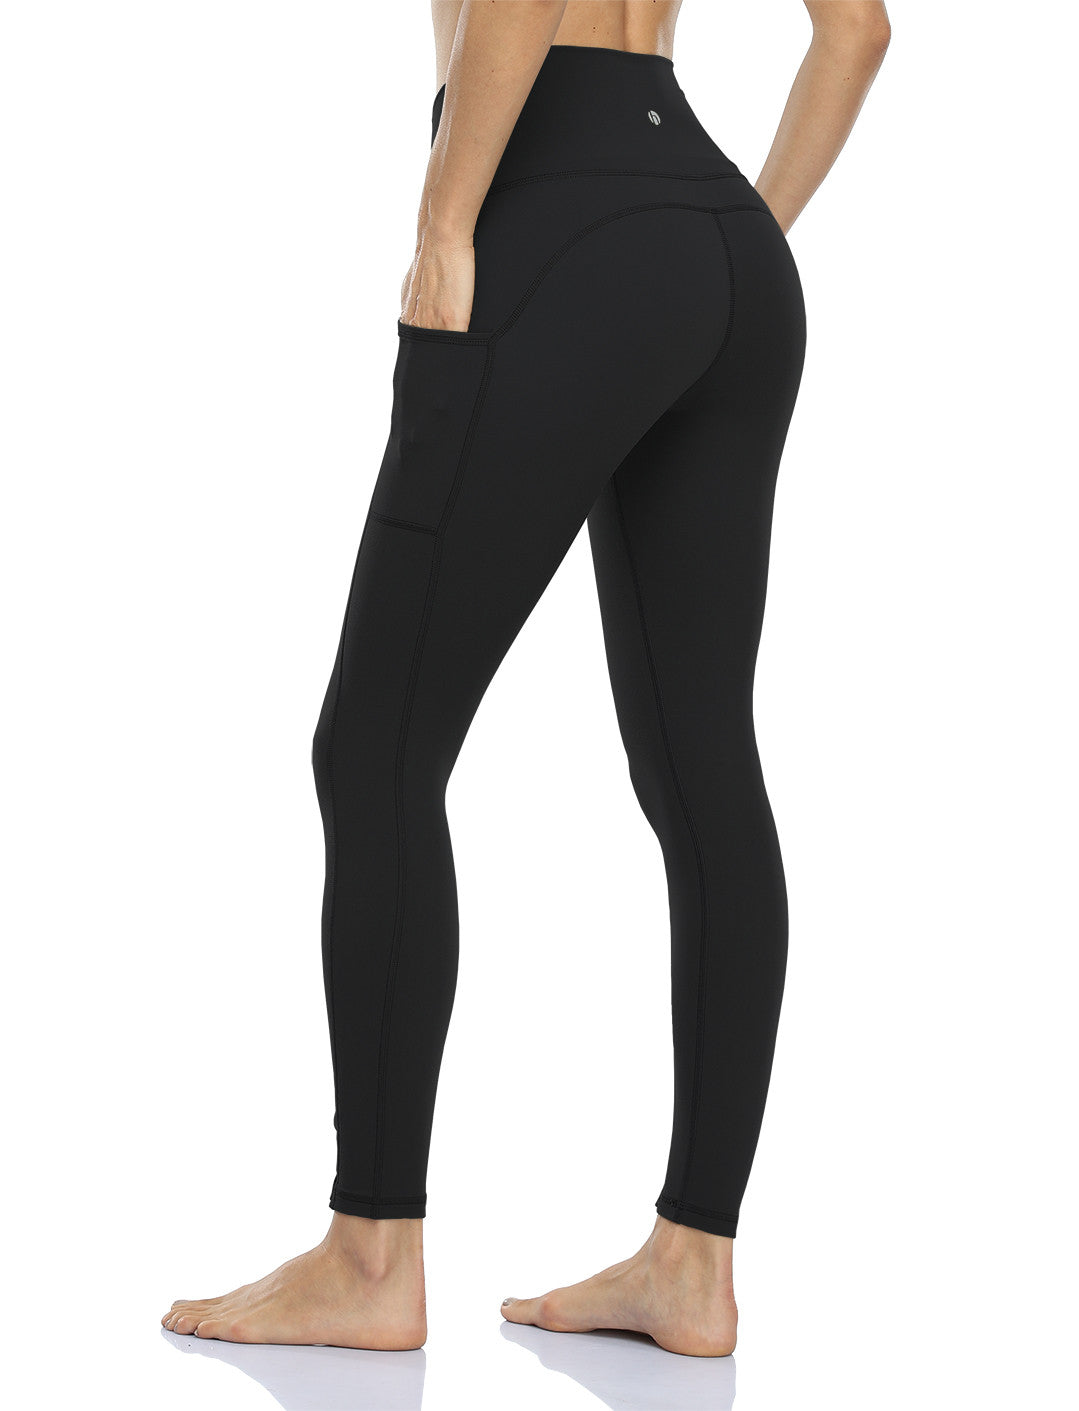 HeyNuts Essential 7/8 Leggings with Side Pockets for Women, High Waisted Compression  Workout Yoga Pants 25'' 25 inches Large Black